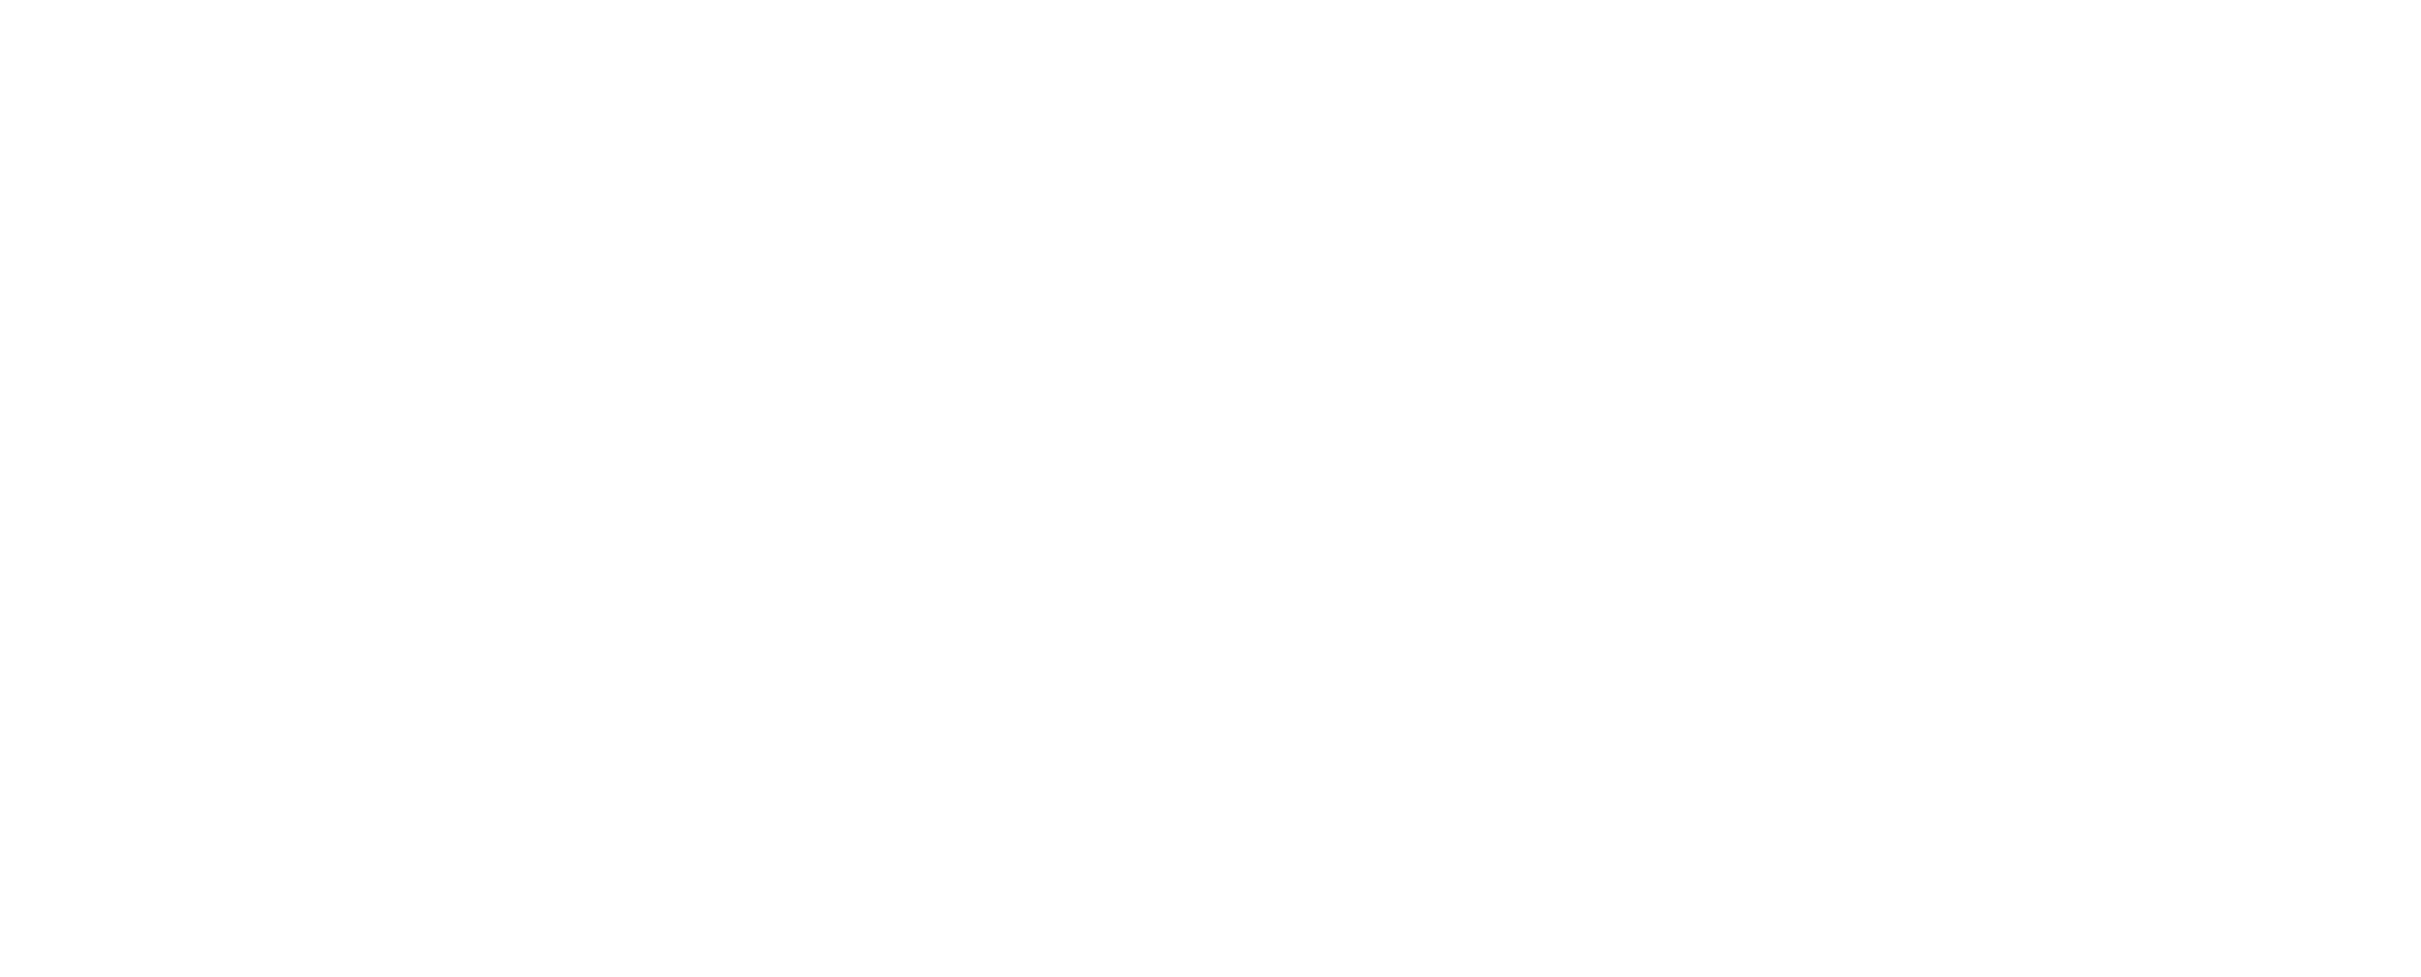 Age action 